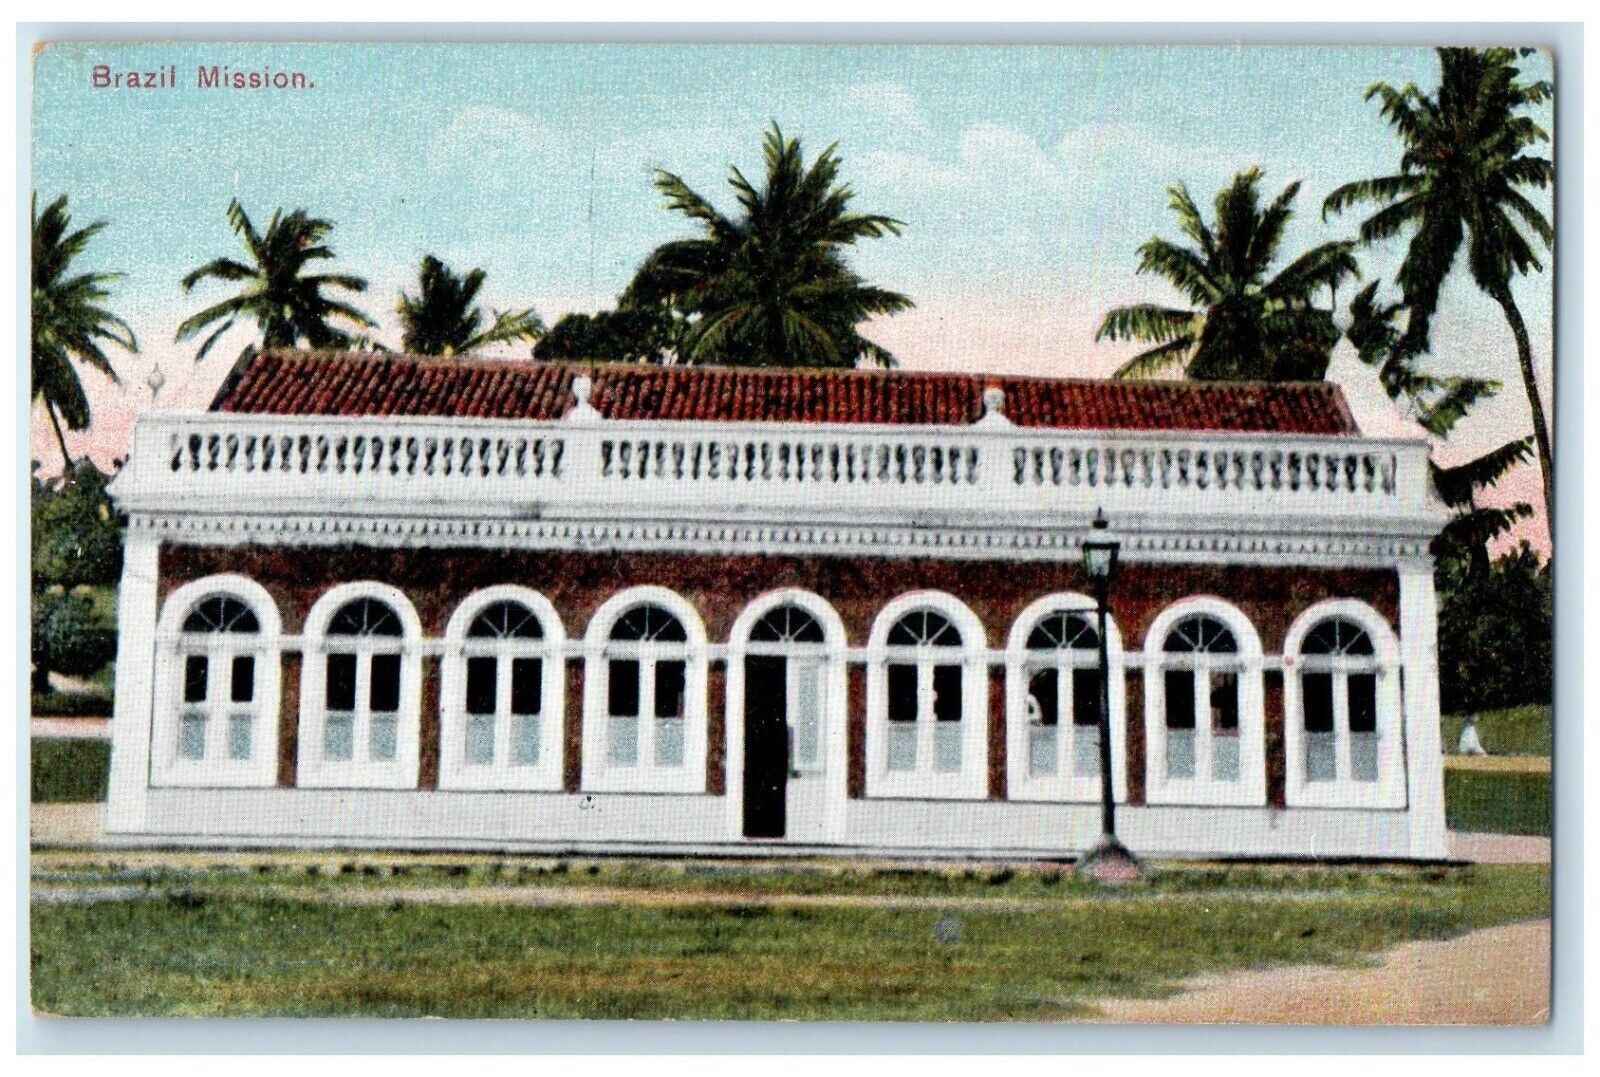 c1910's College For Boys Lavras Christian Missionary Brazil Mission Postcard